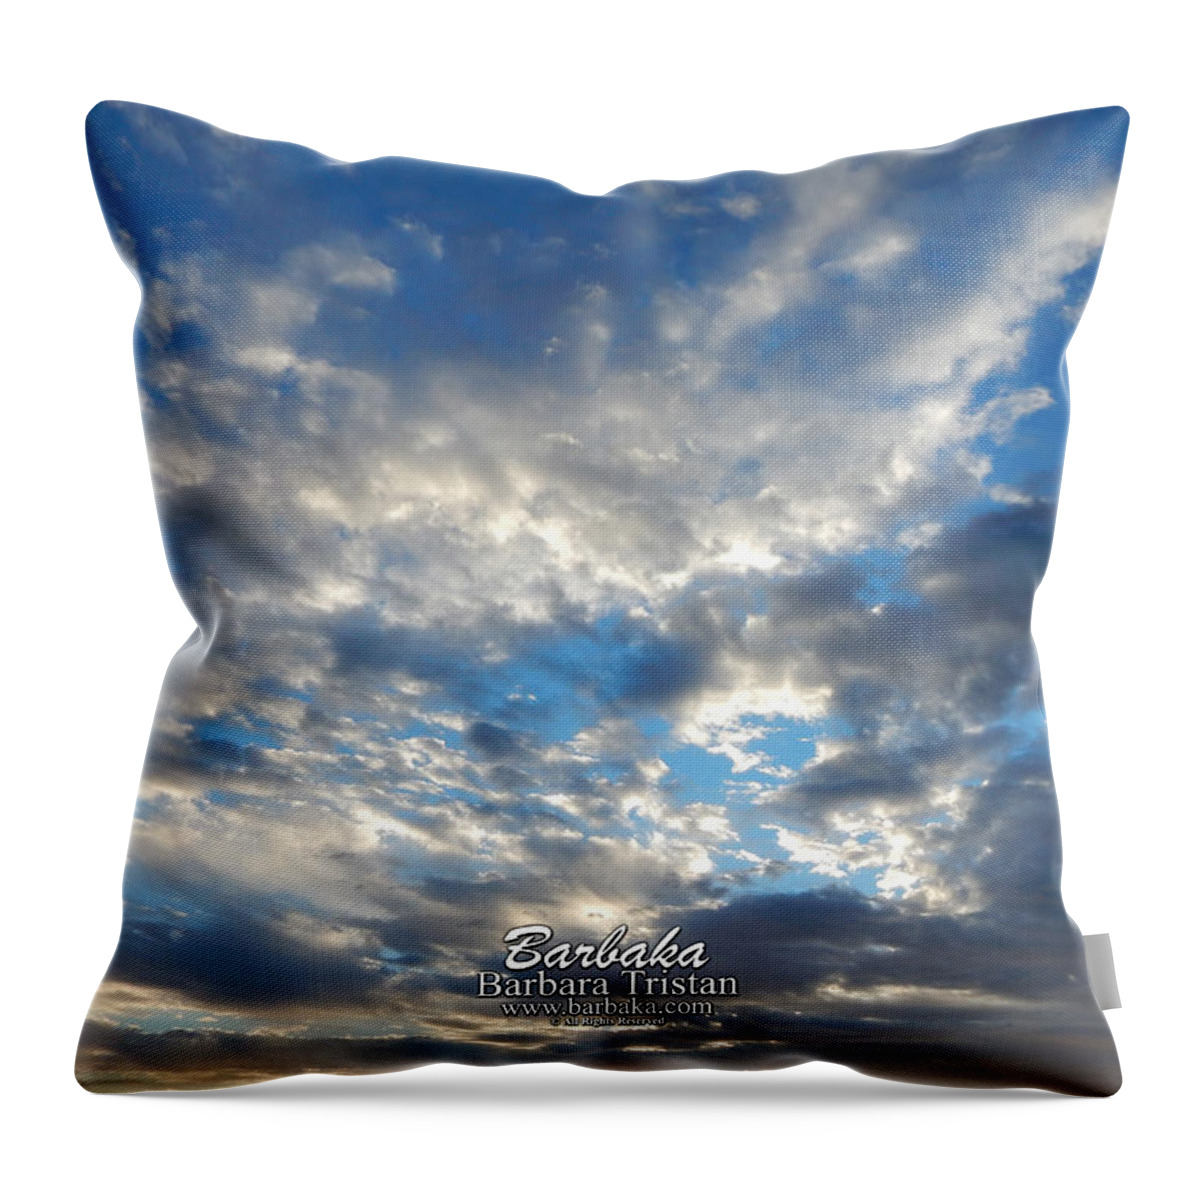 11/08/15 Sunday Throw Pillow featuring the photograph Clouds #4049 by Barbara Tristan